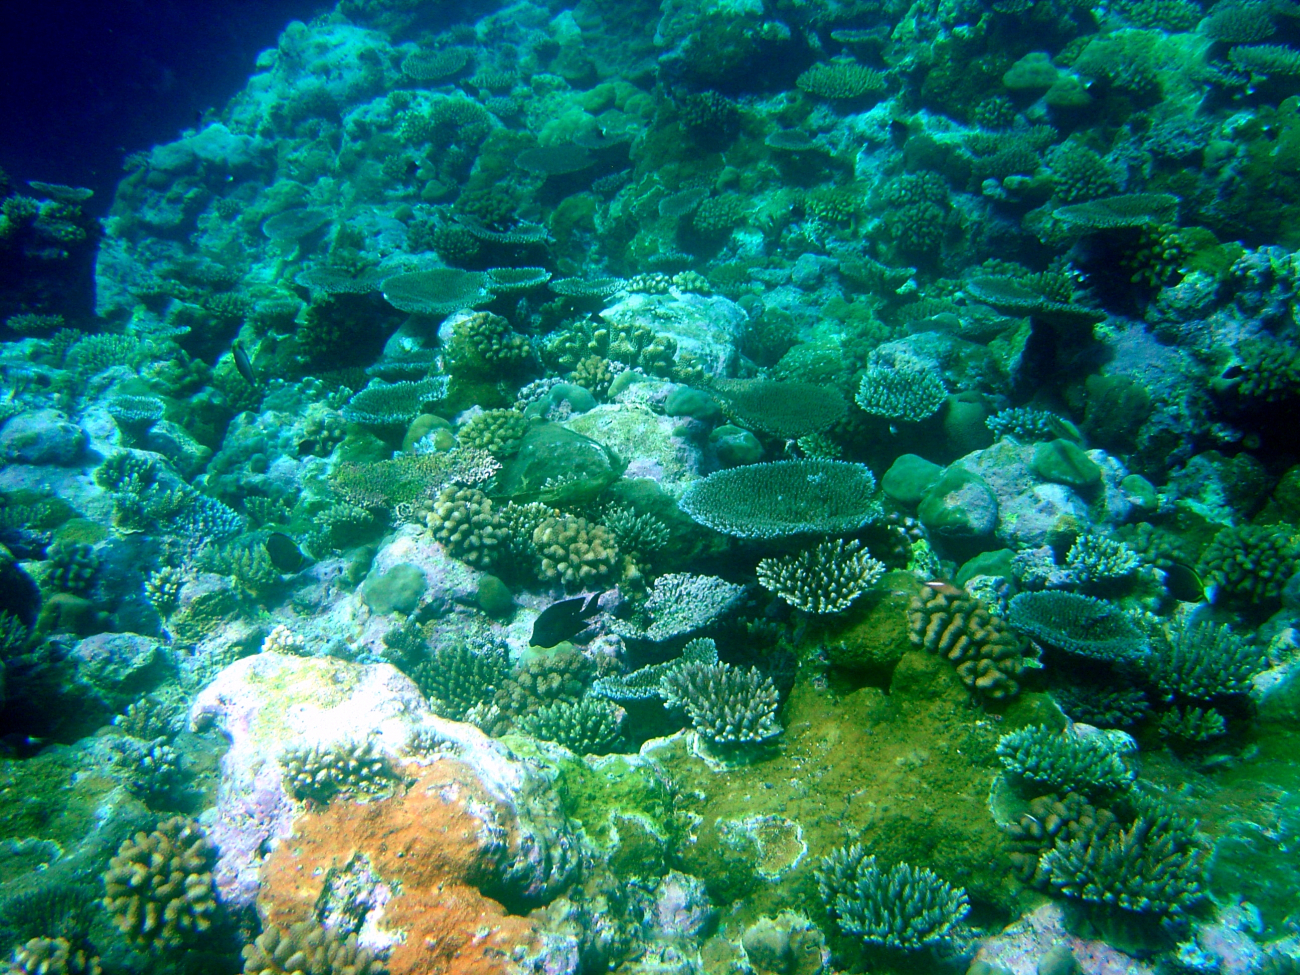 A reef scene dominated by various species of Acropora